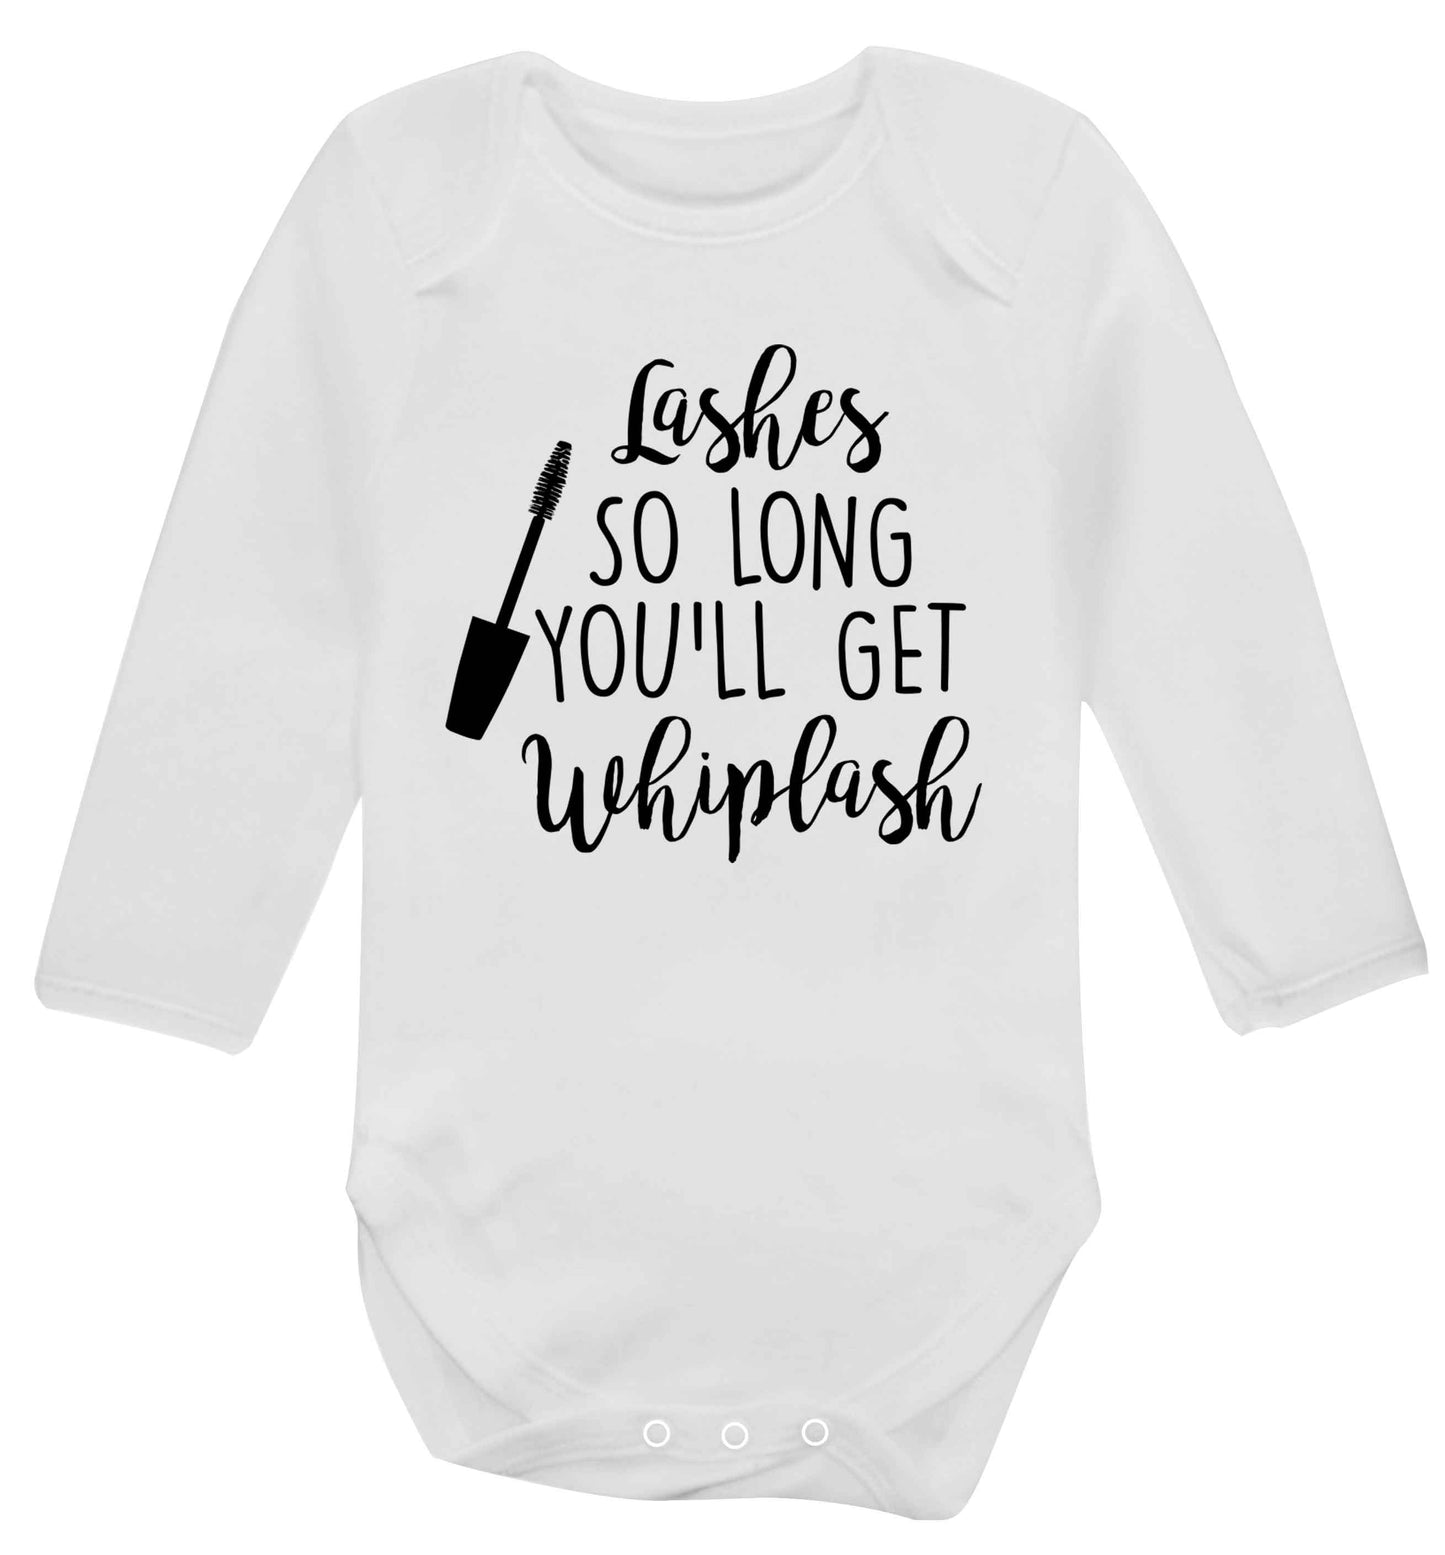 Lashes so long you'll get whiplash Baby Vest long sleeved white 6-12 months